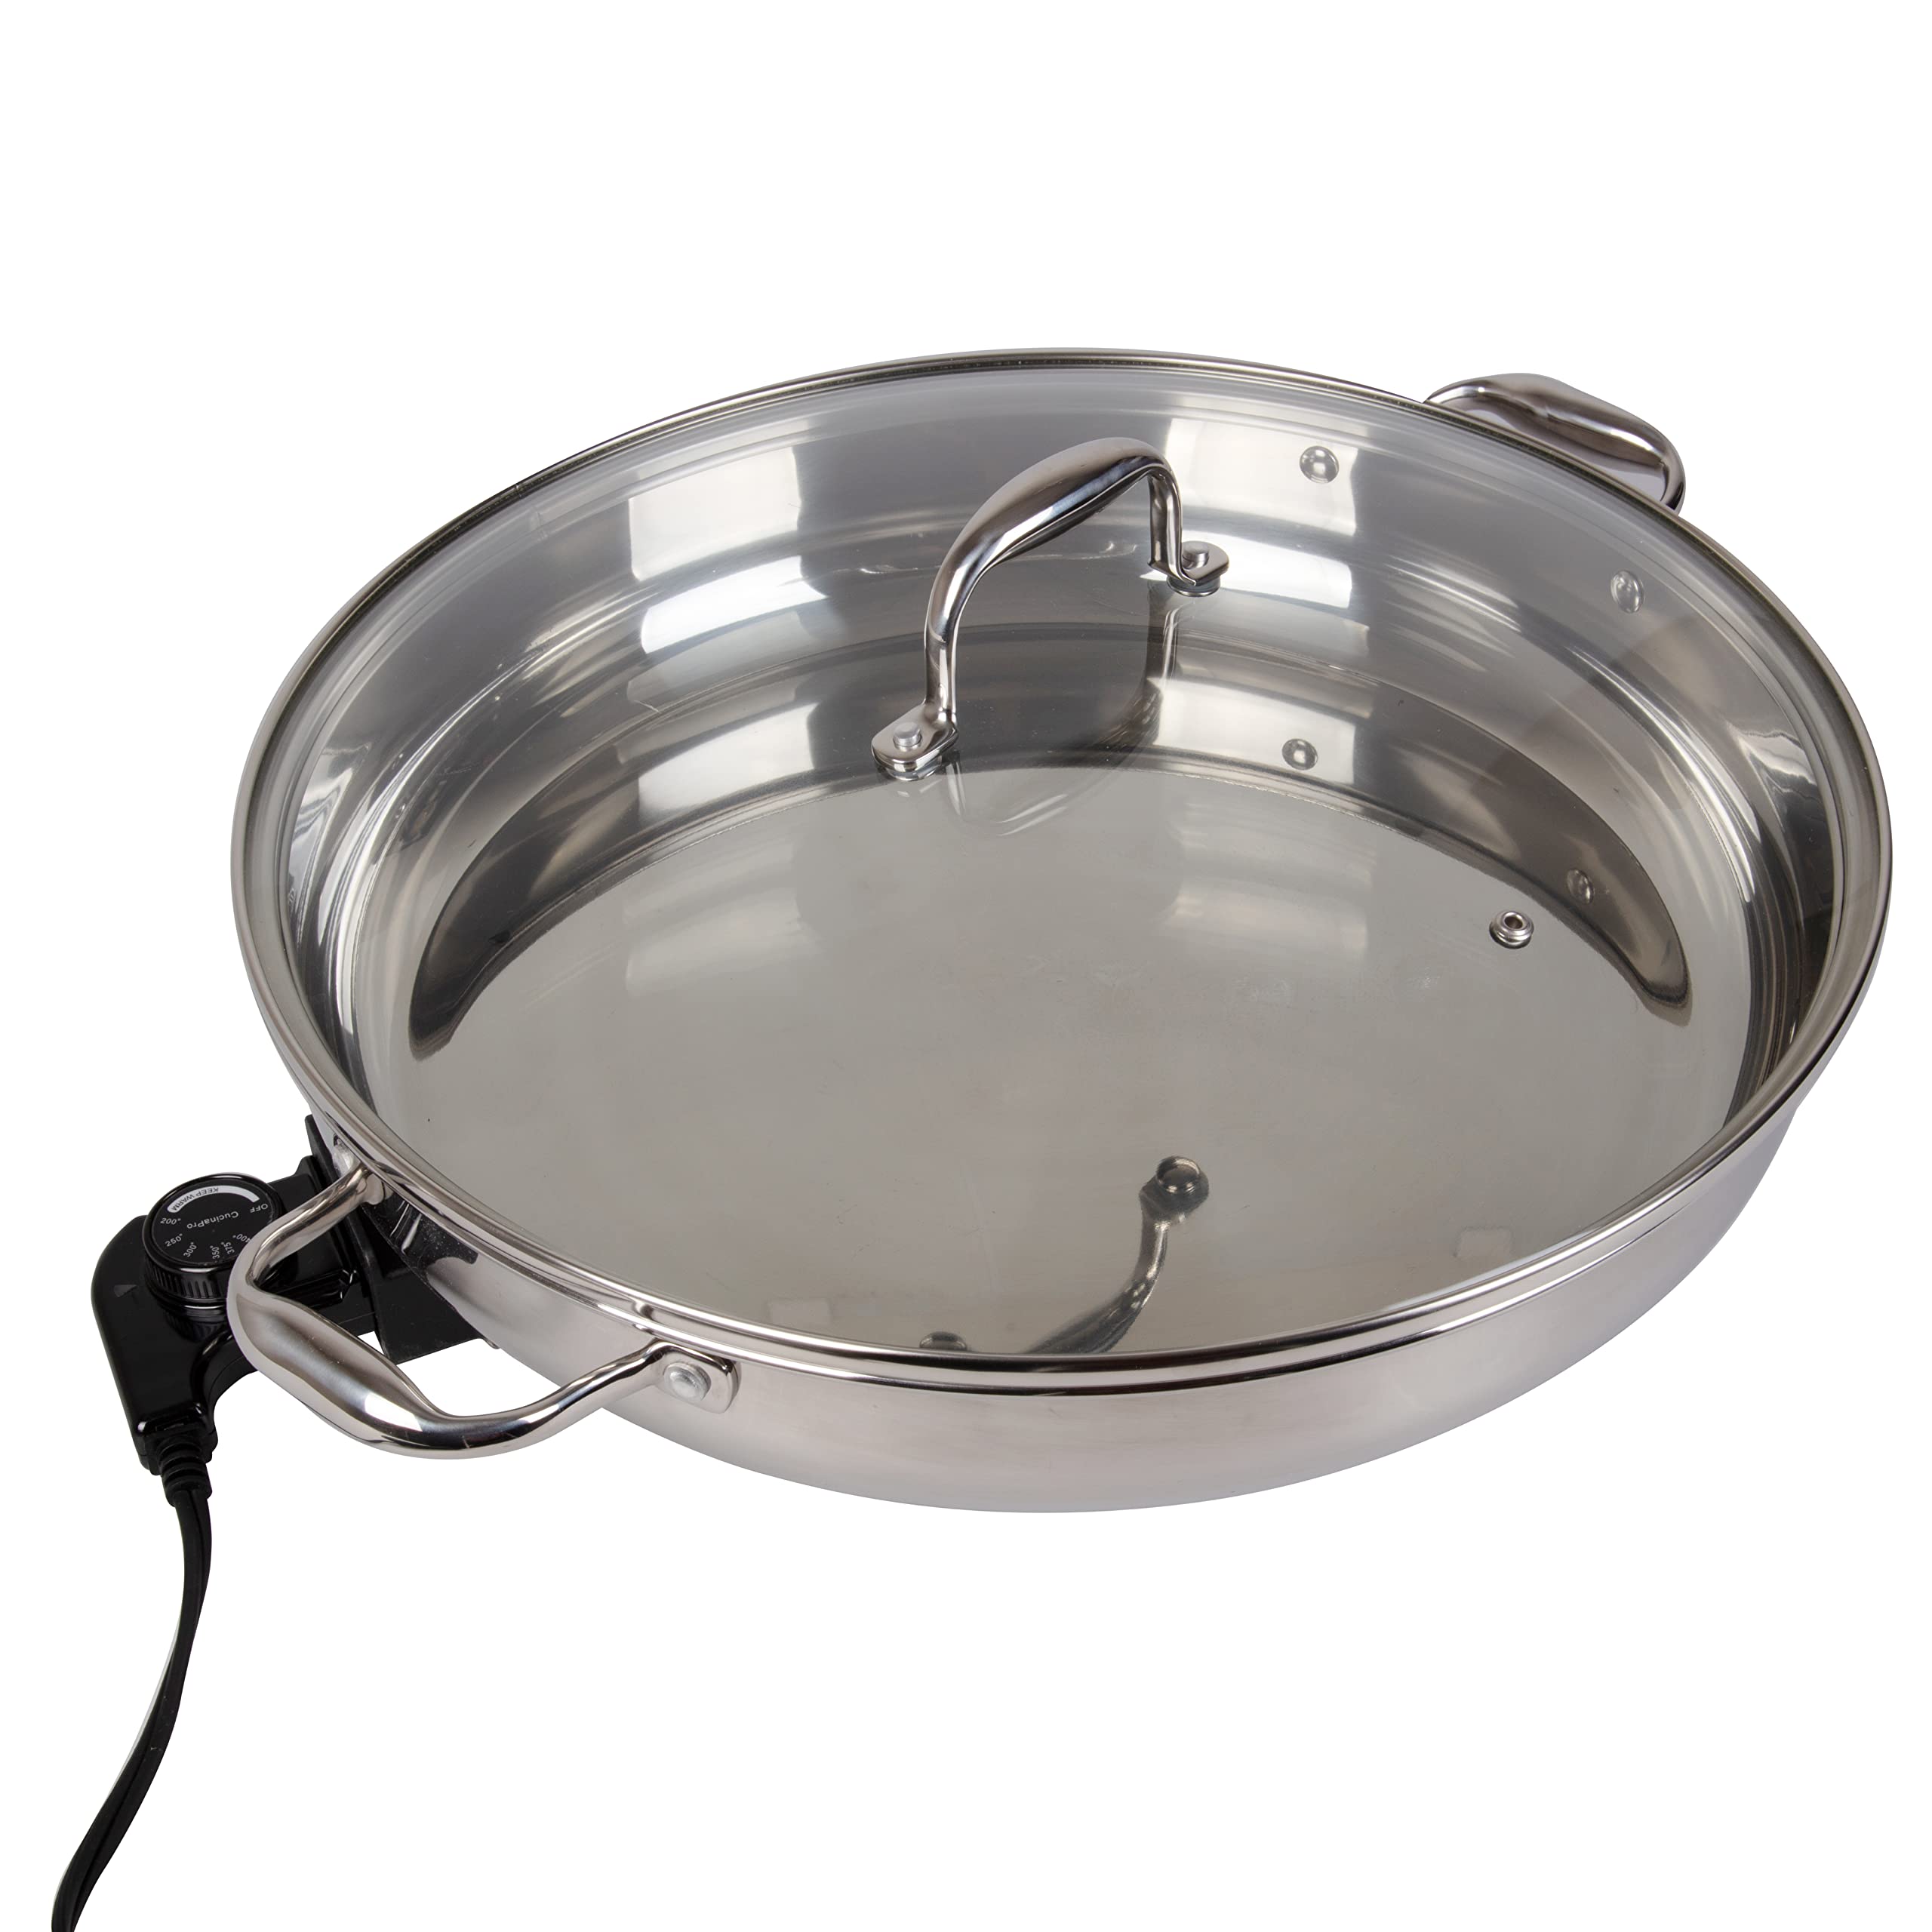 Electric Skillet By Cucina Pro